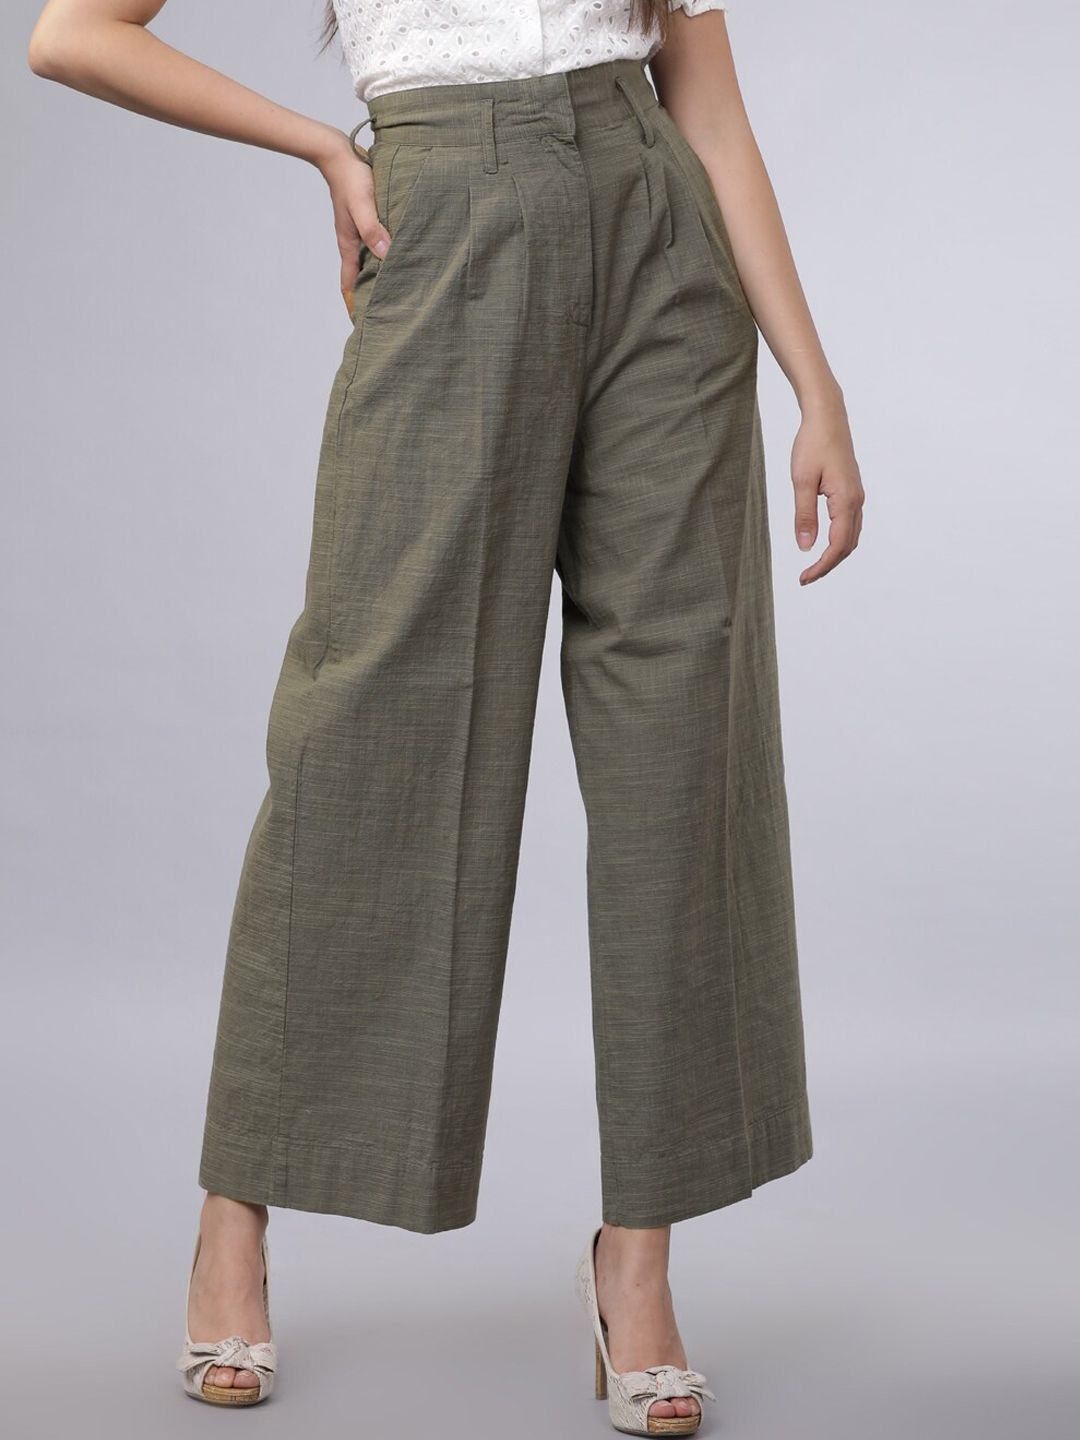 Tokyo Talkies Women Green Parallel Trousers Price in India